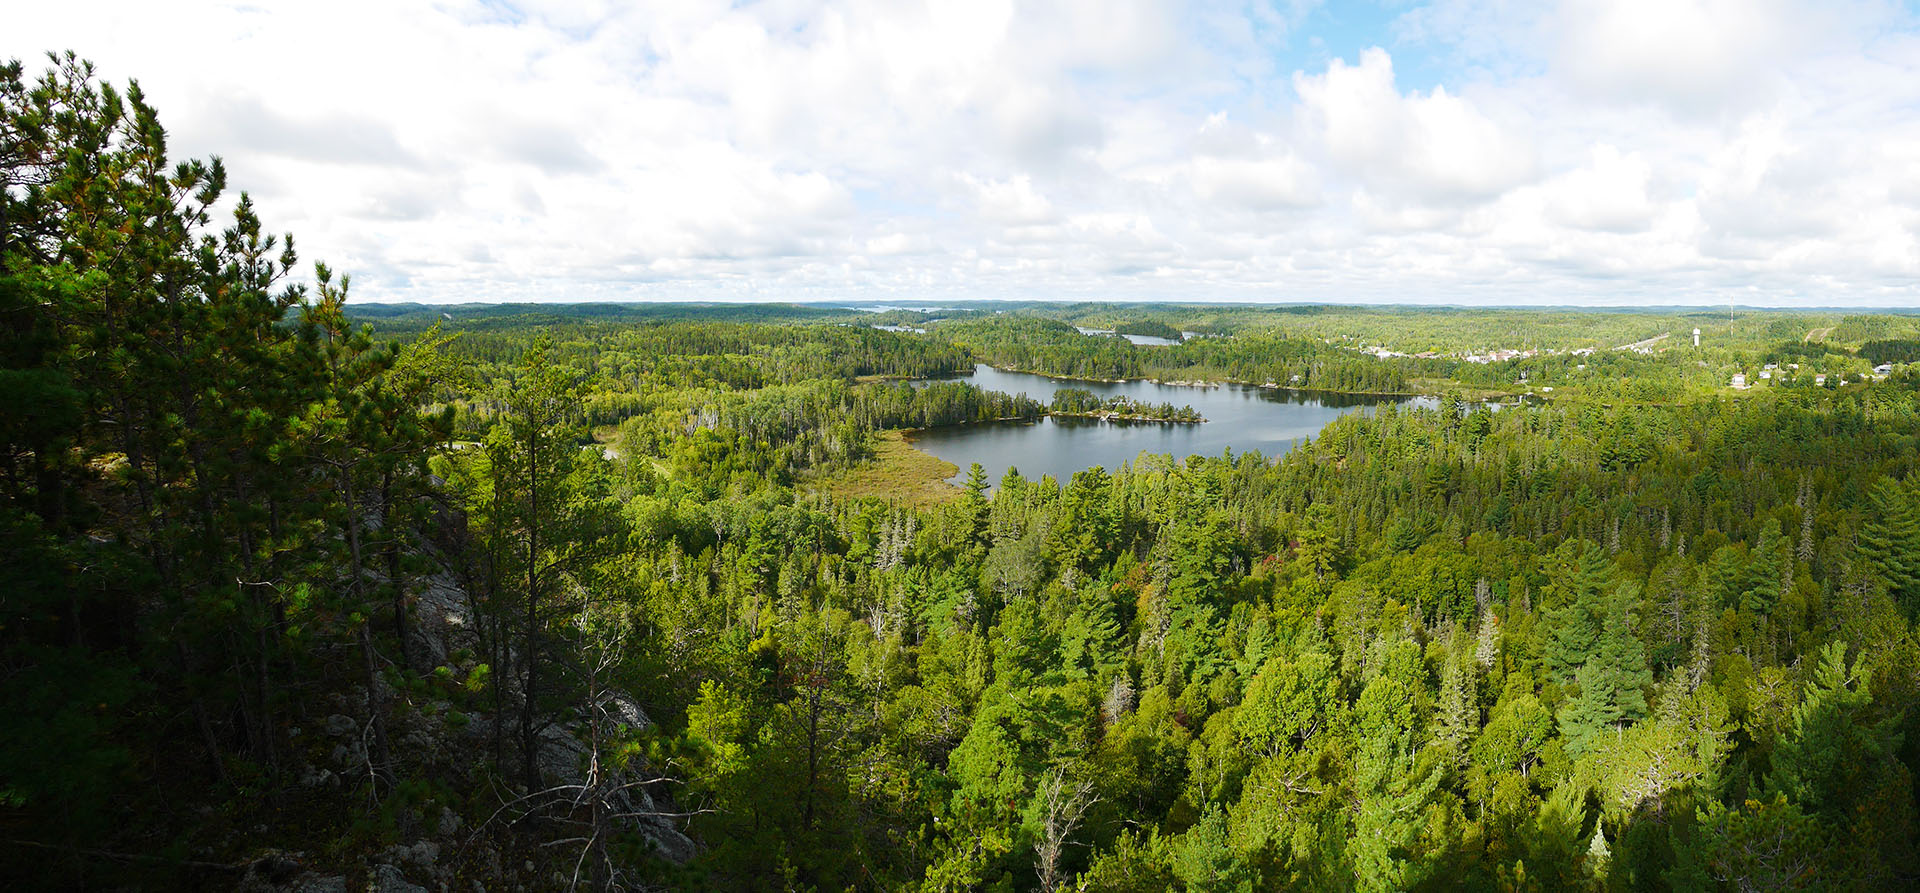 a view of a green forested valley with a blue lake in the far distance